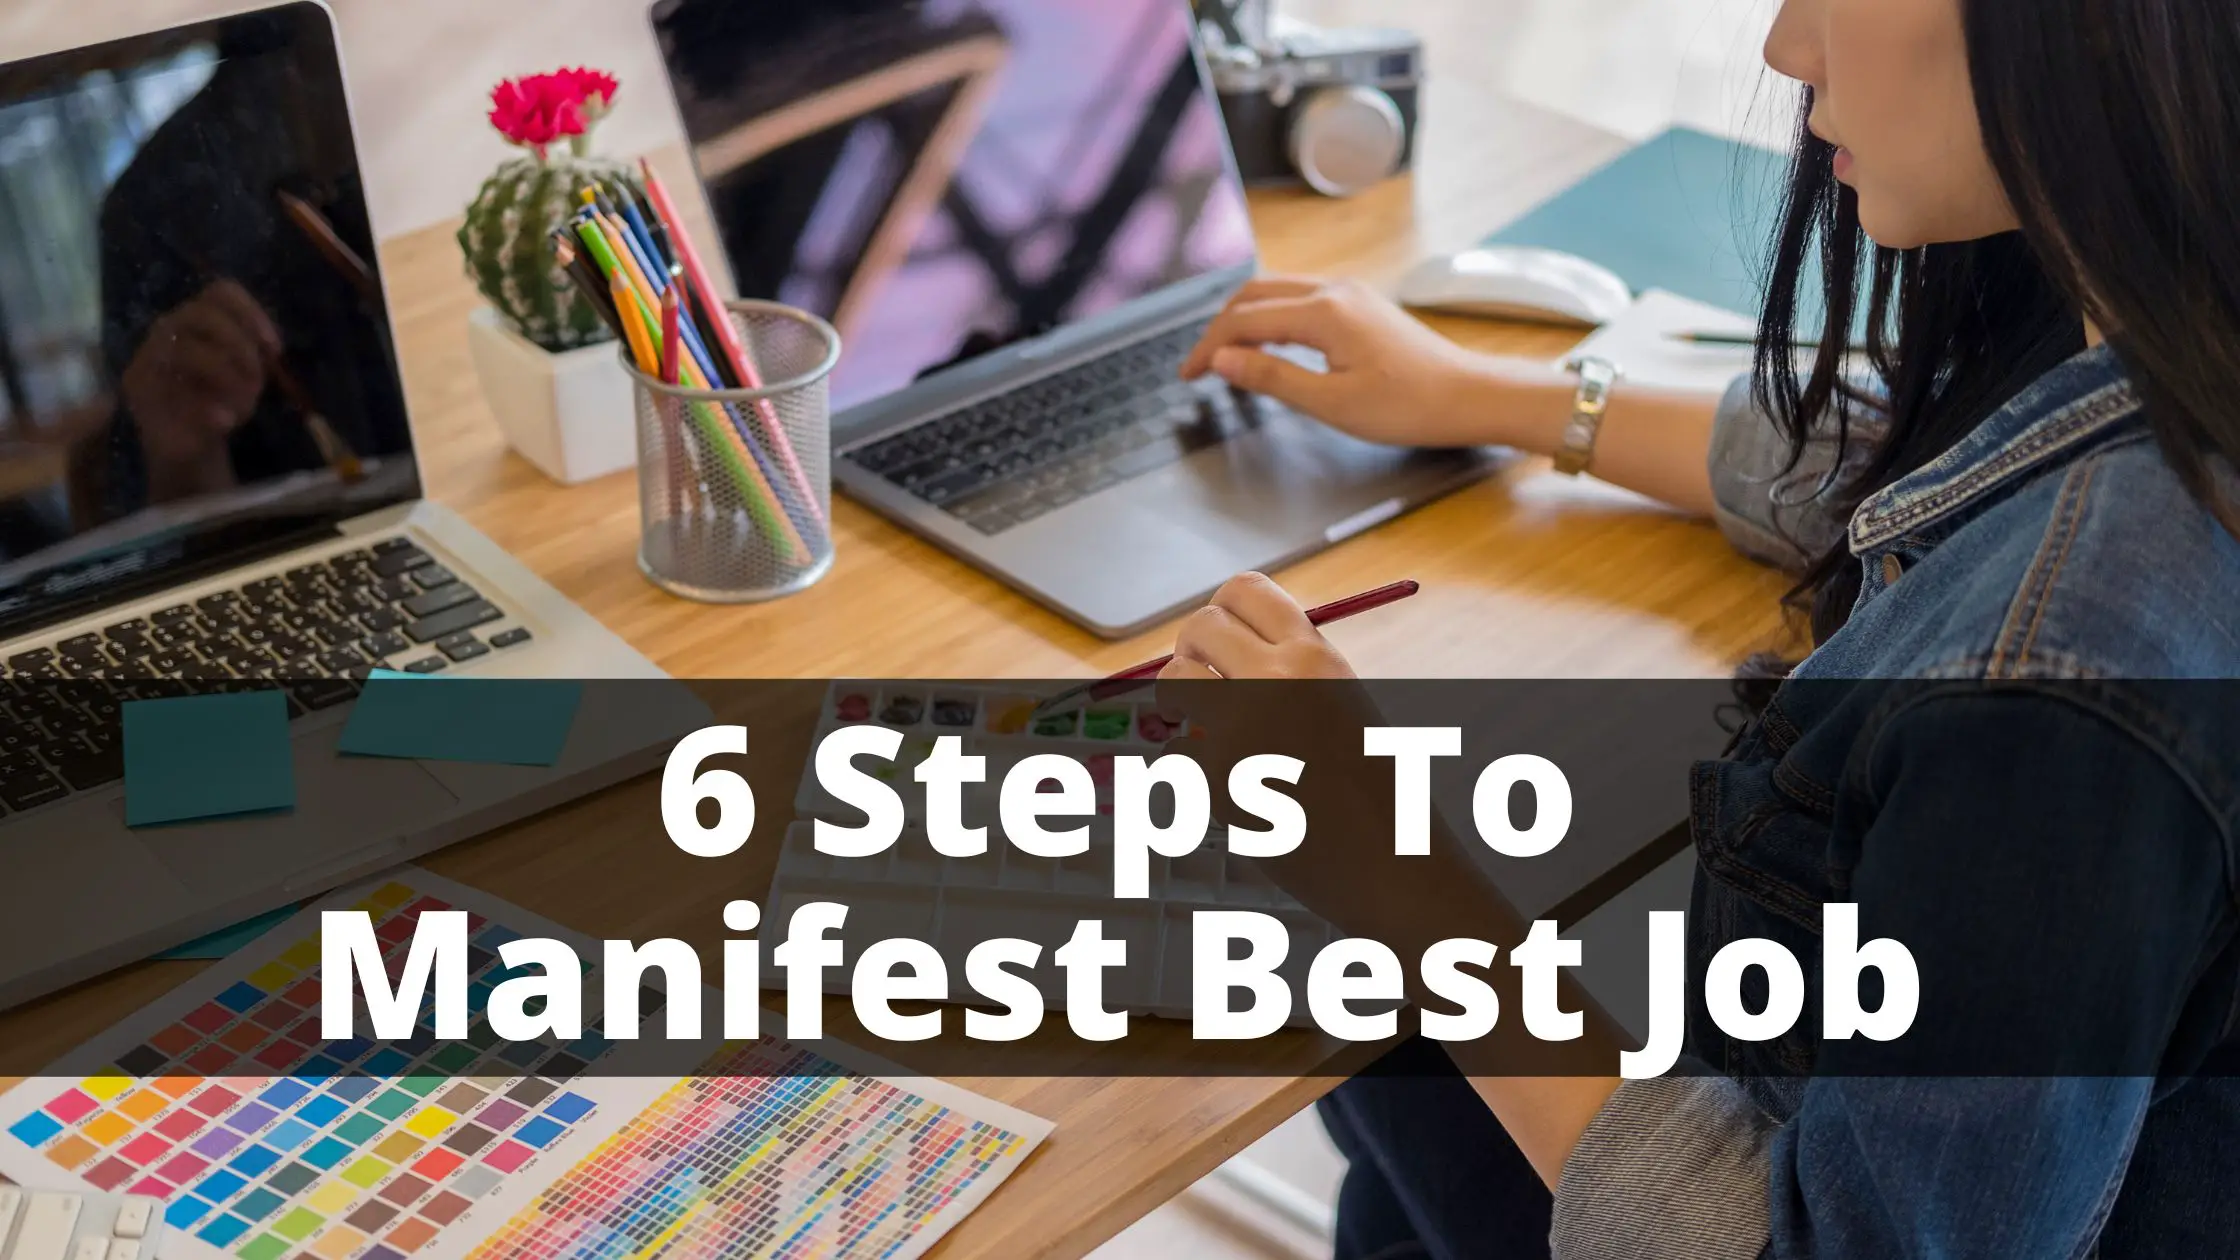 How To Manifest Job You’ll Never Hate In 6 Steps?